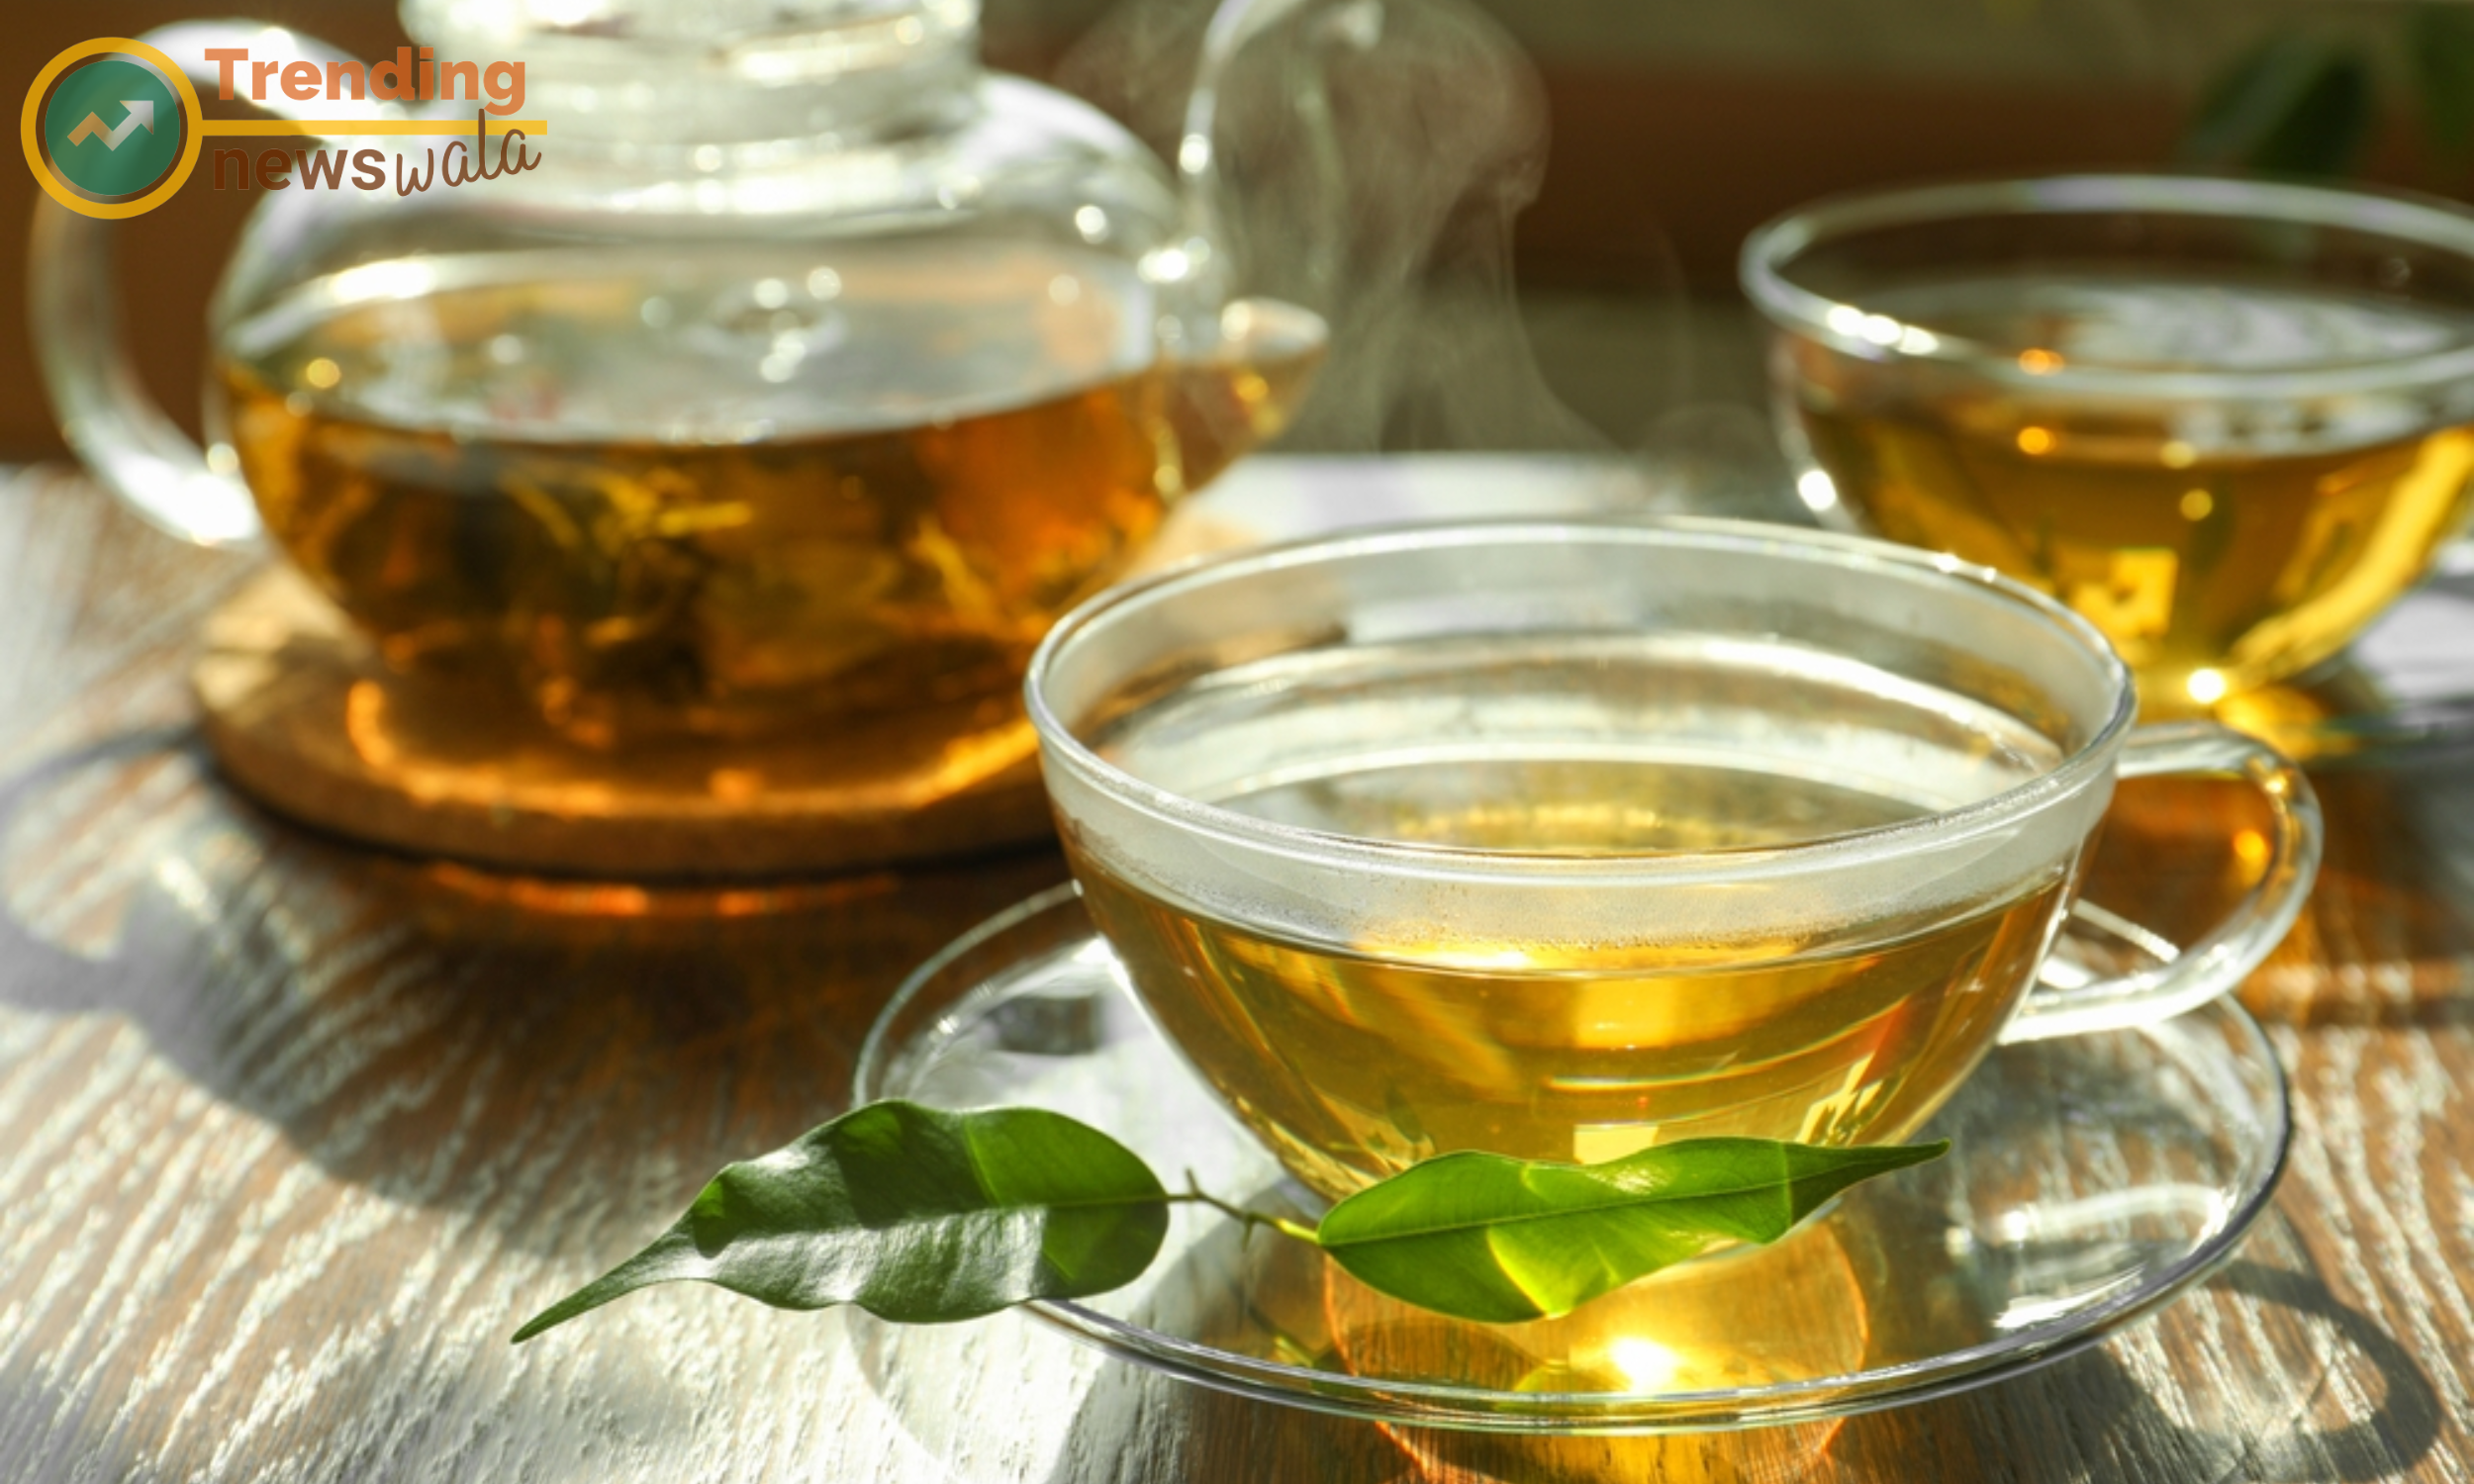 Dental Benefits of Drinking Green Tea, Incorporating Green Tea into Your Routine